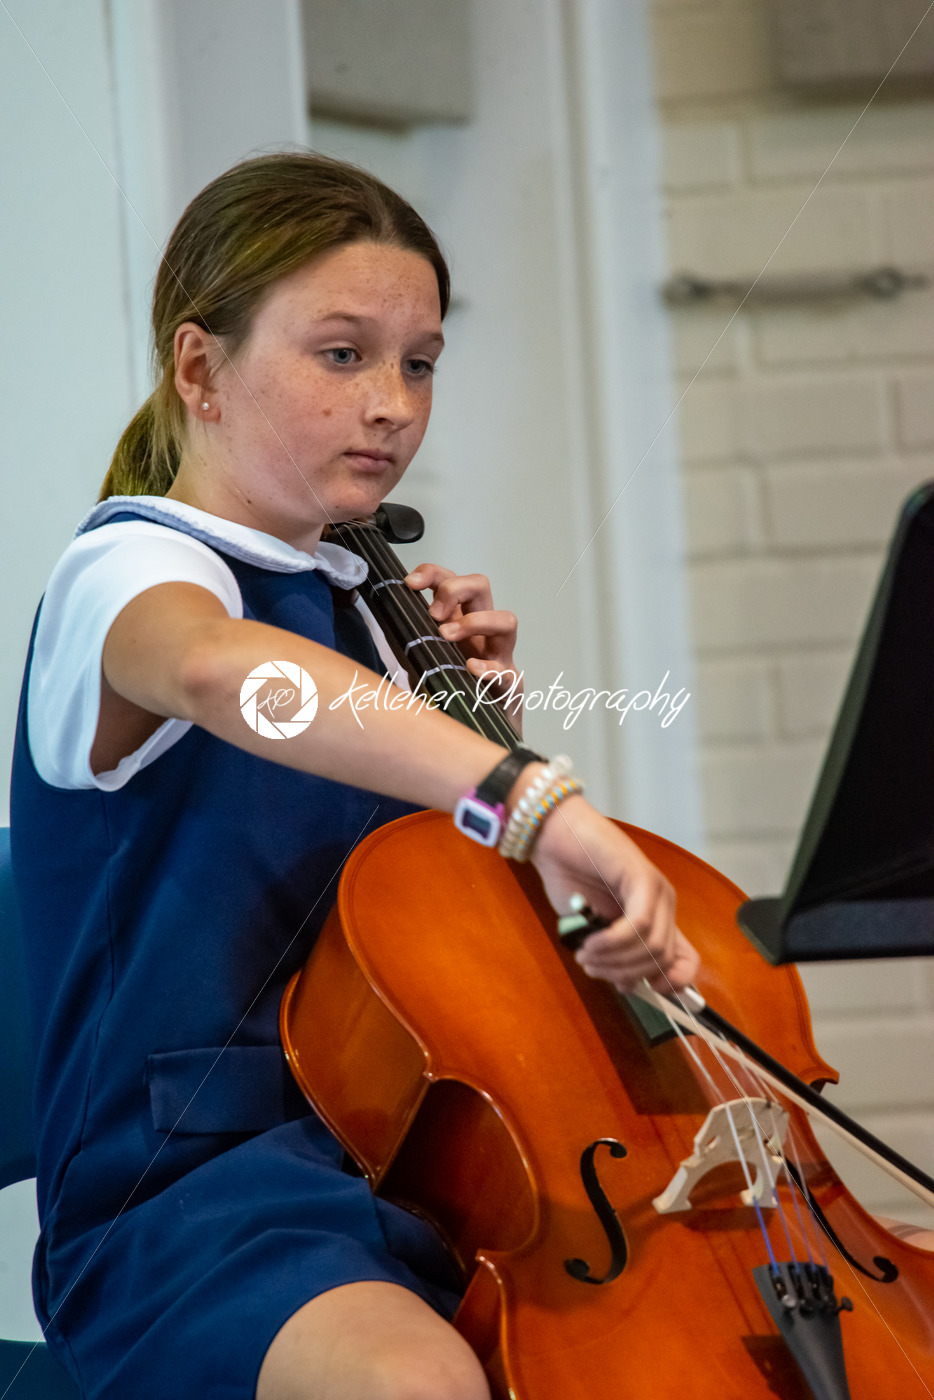 ROSEMONT, PA – MAY 24, 2019: Lower school instrumental concert at The Agnes Irwin School - Kelleher Photography Store